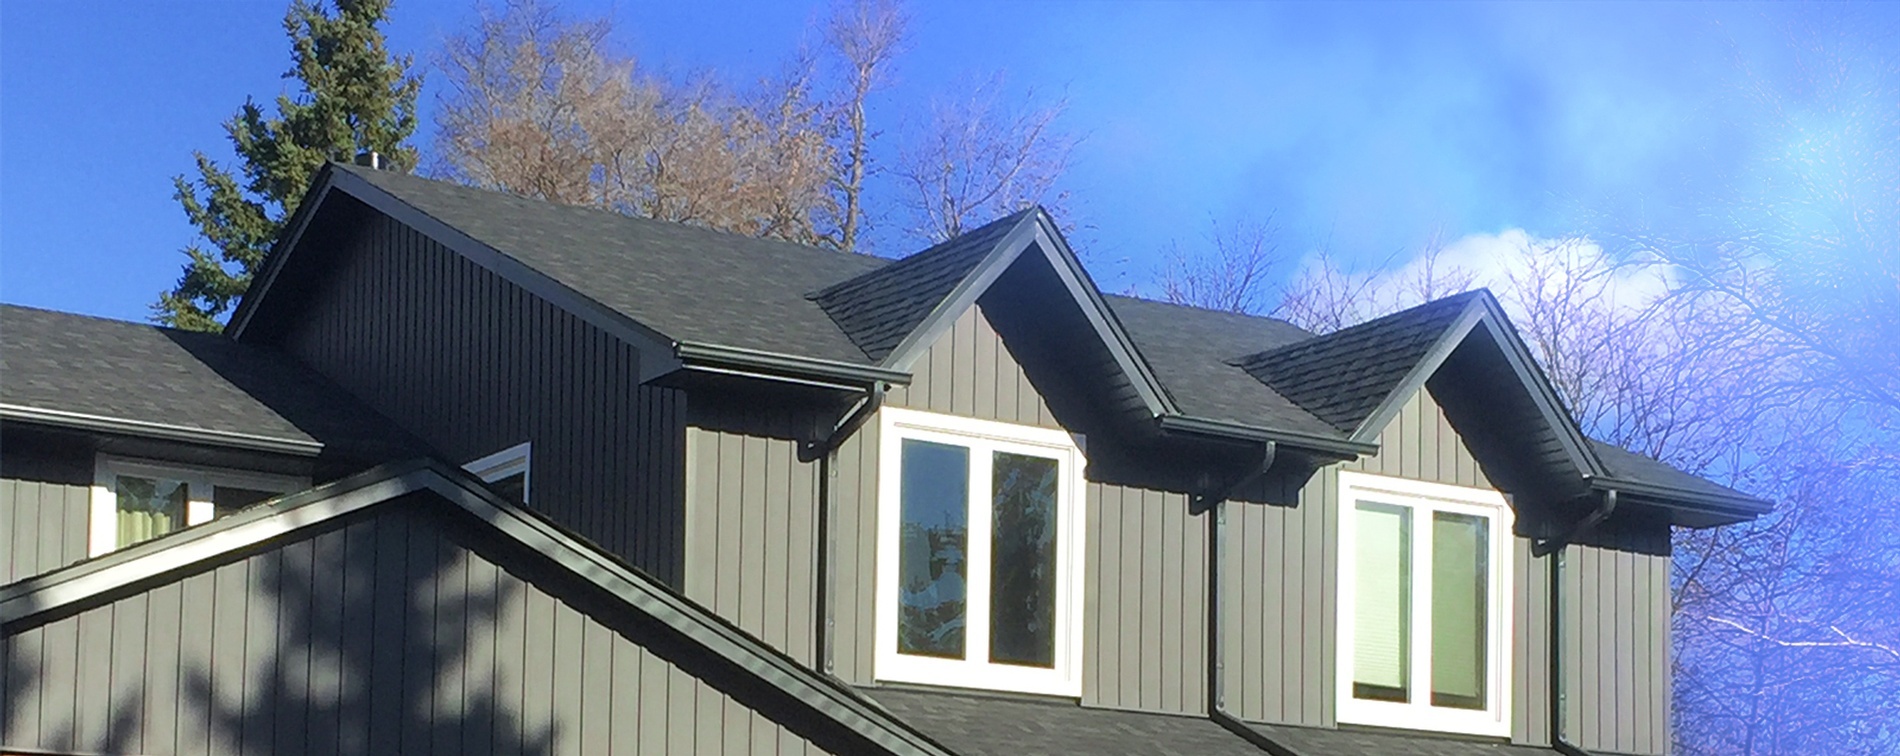 Our Roofers can give your home the look of the modern age with our Residential Roofing in Toronto